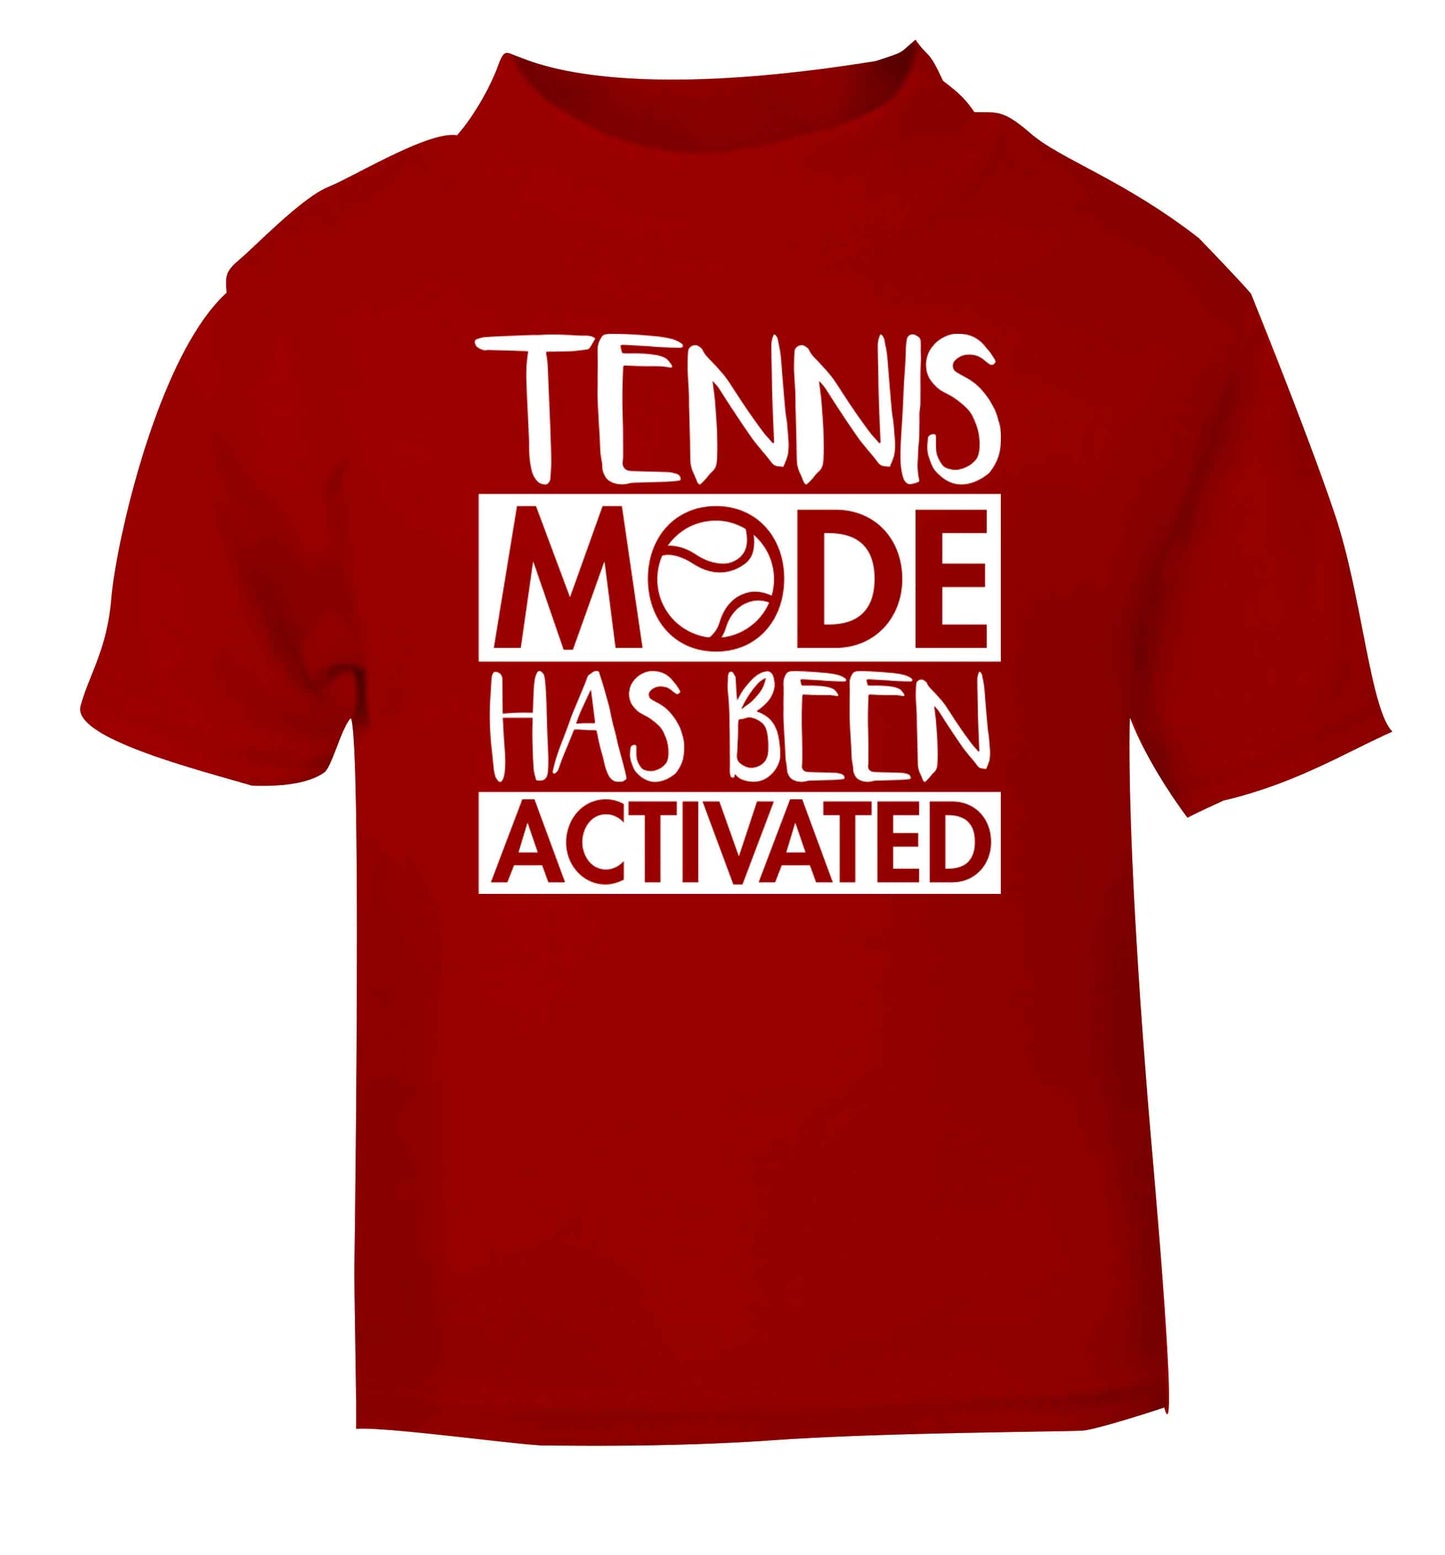 Tennis mode has been activated red Baby Toddler Tshirt 2 Years